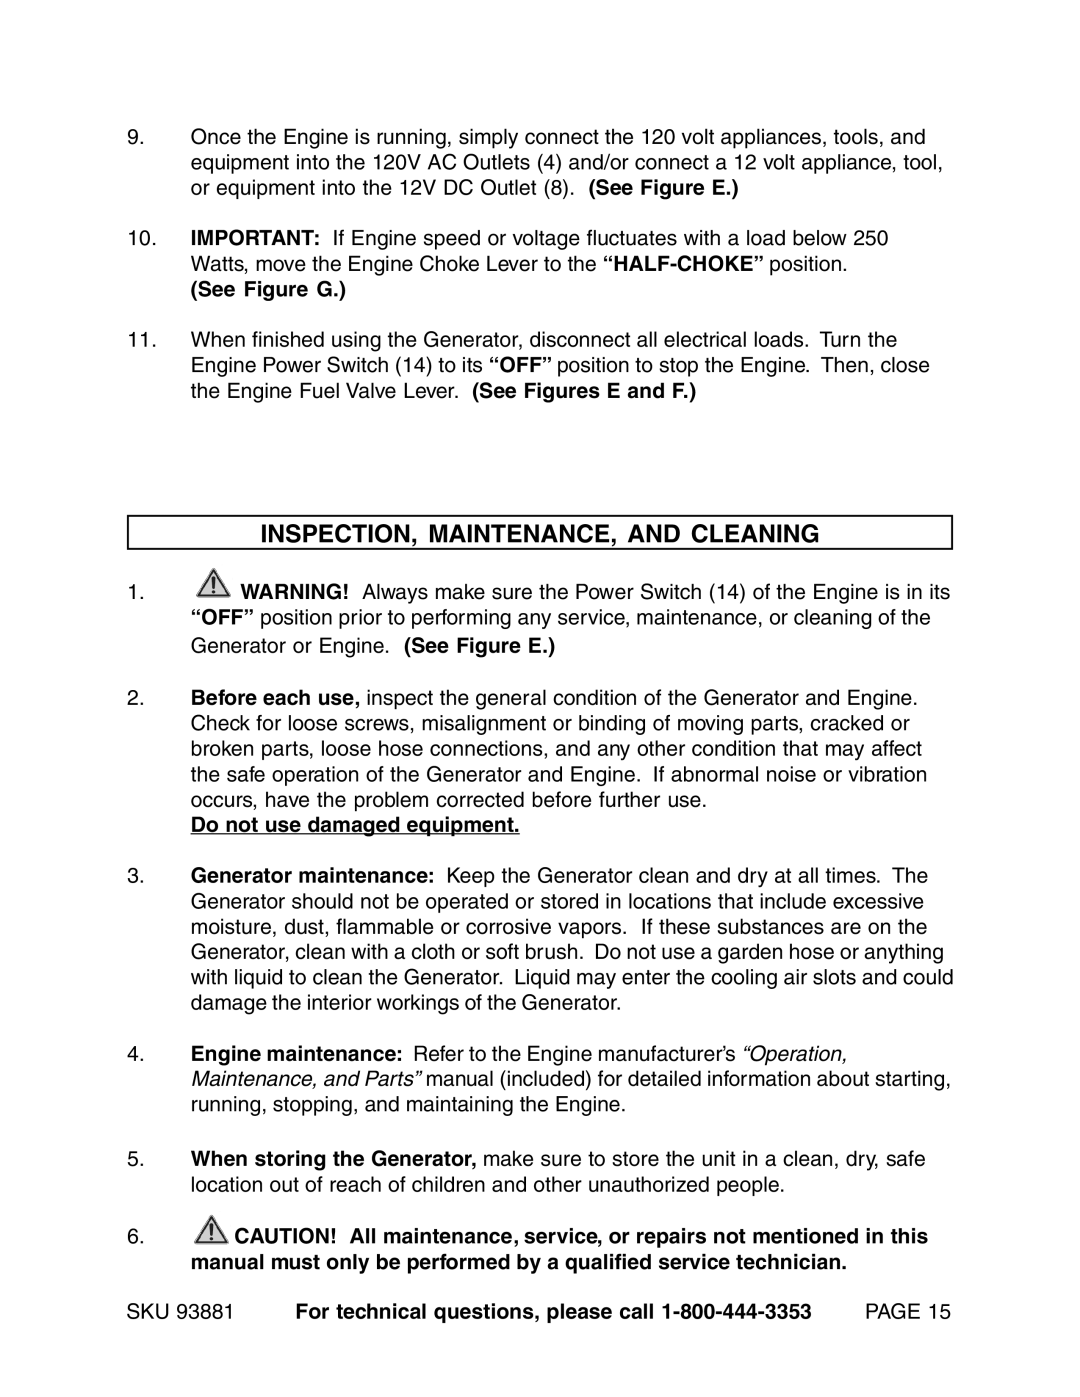 Chicago Electric 93881 Inspection, Maintenance, And Cleaning, See Figure G, Do not use damaged equipment 